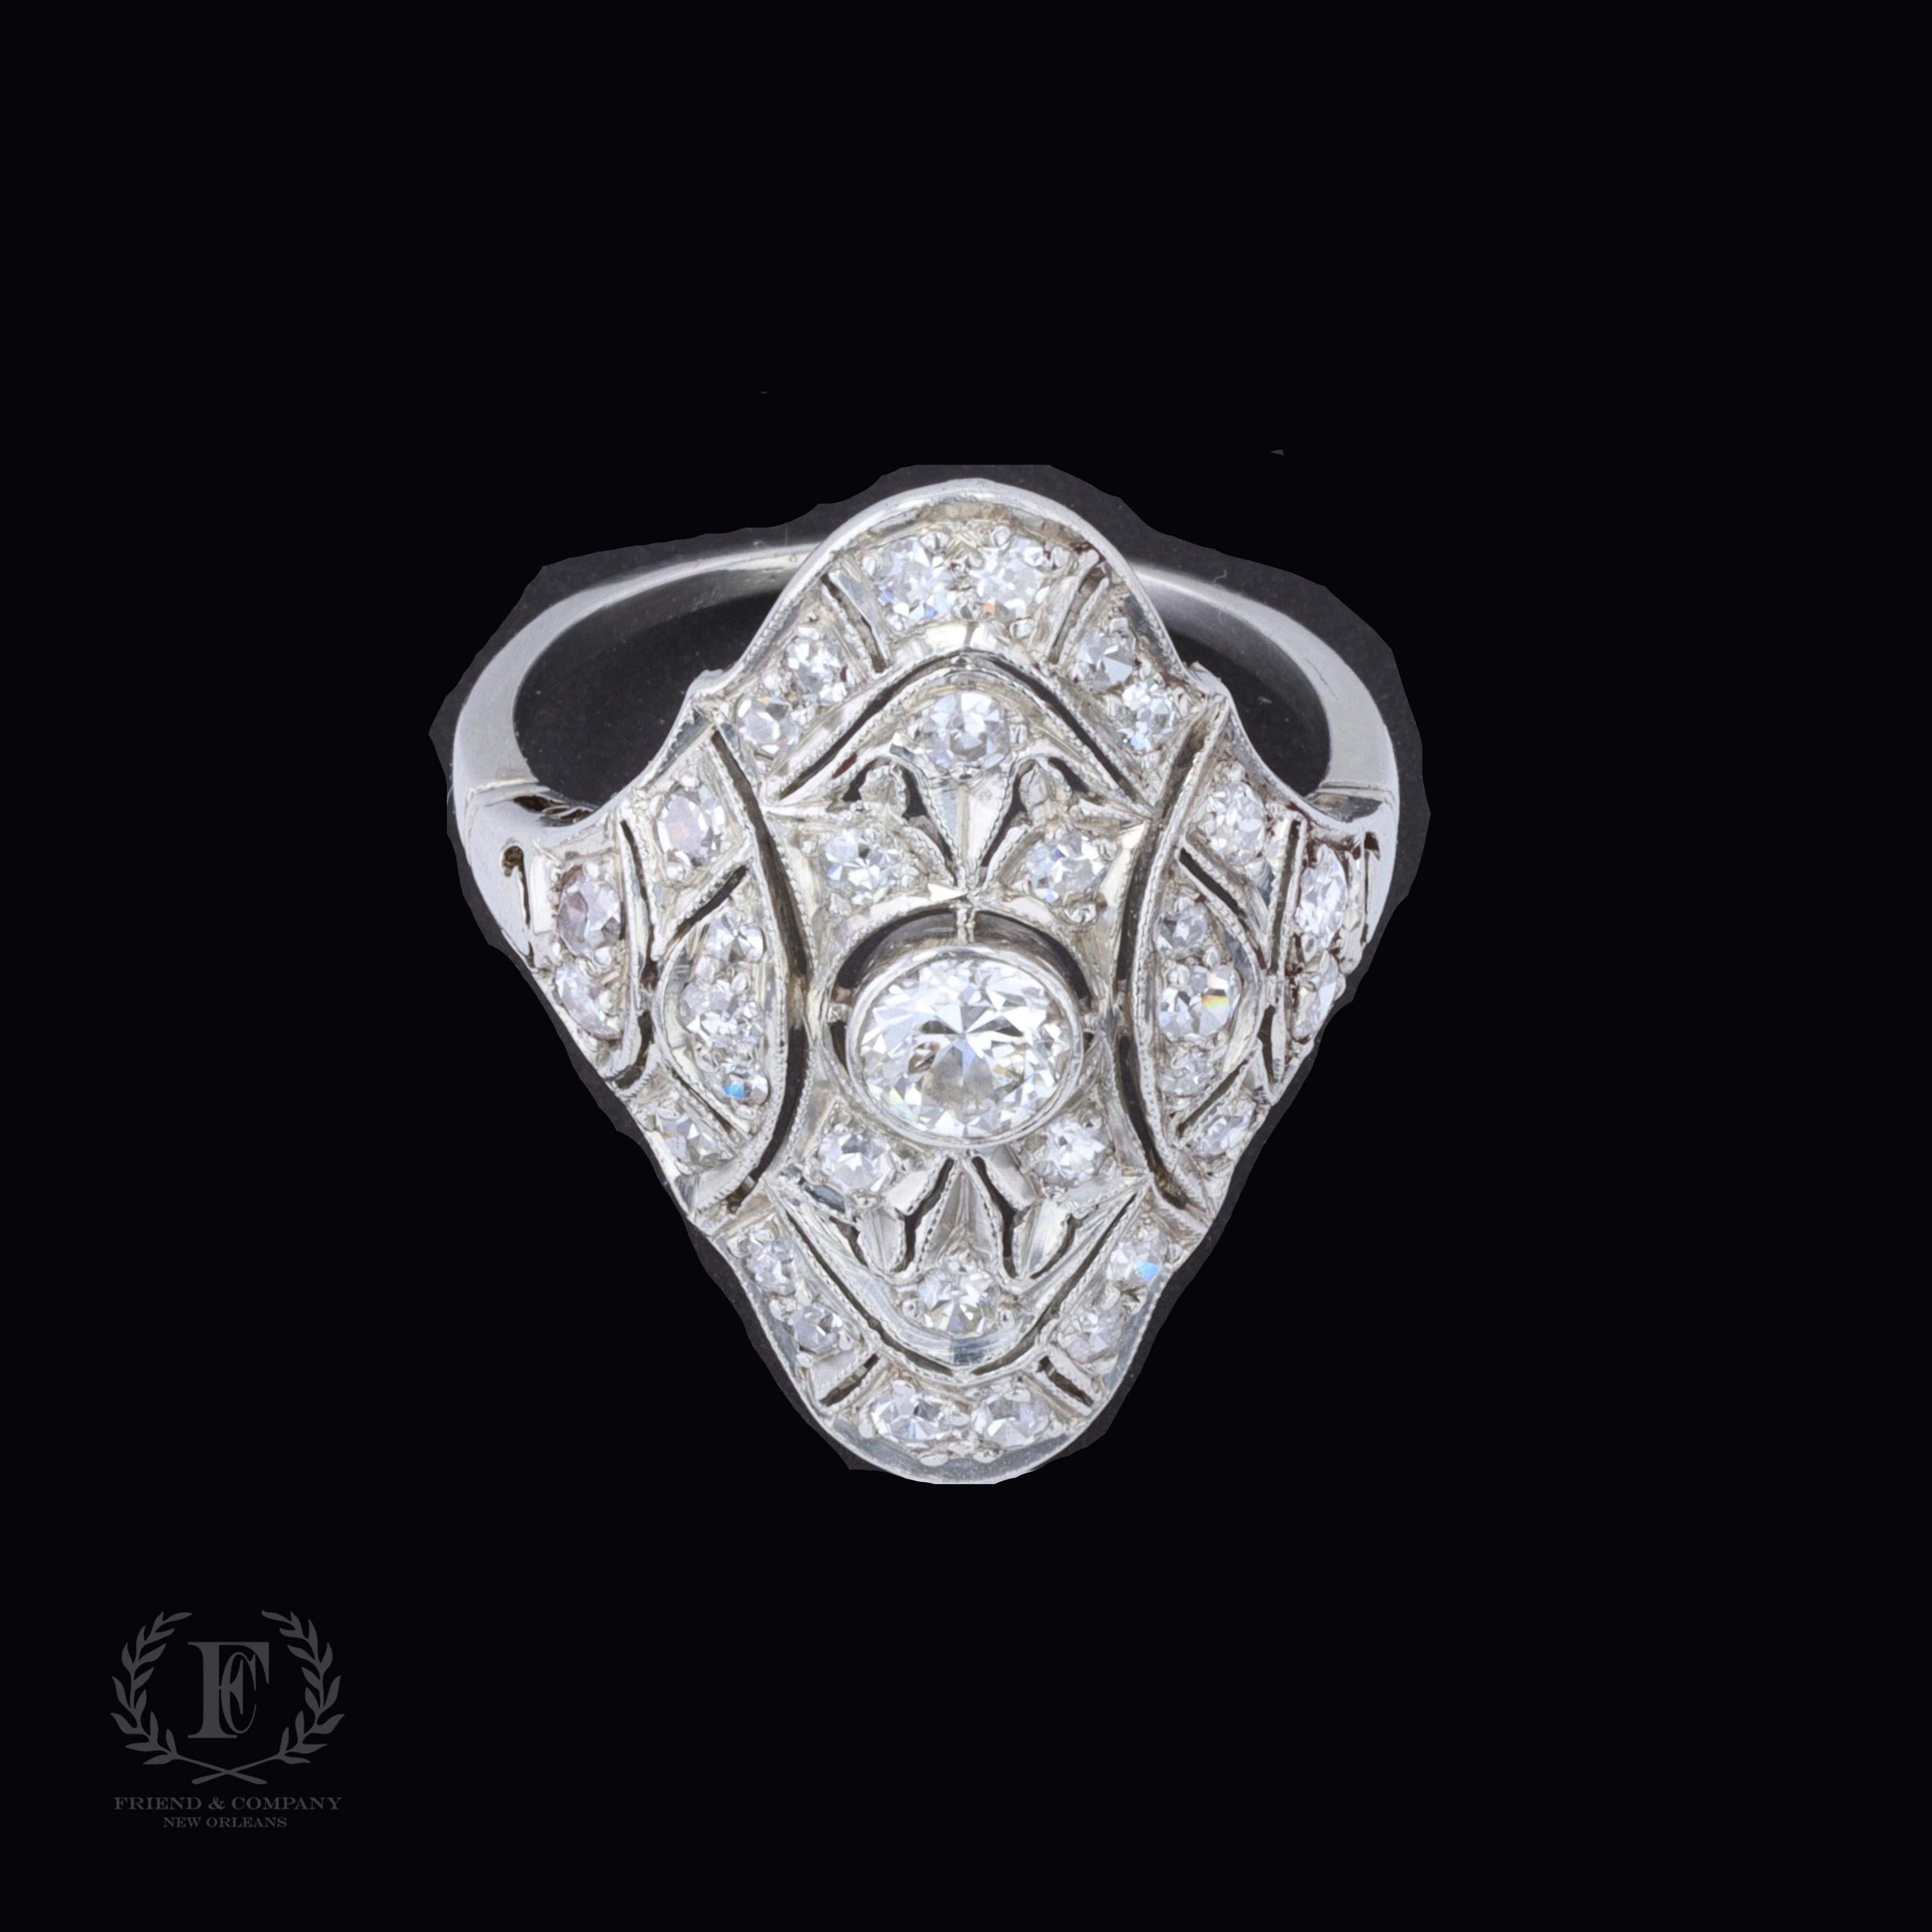 This Art Deco ring is centered with round cut diamonds that weighs approximately 0.45 carats. The color of the diamond is I, and the clarity is SI. The center diamond is accentuated by small round cut diamonds that weigh approximately 0.50 carats.